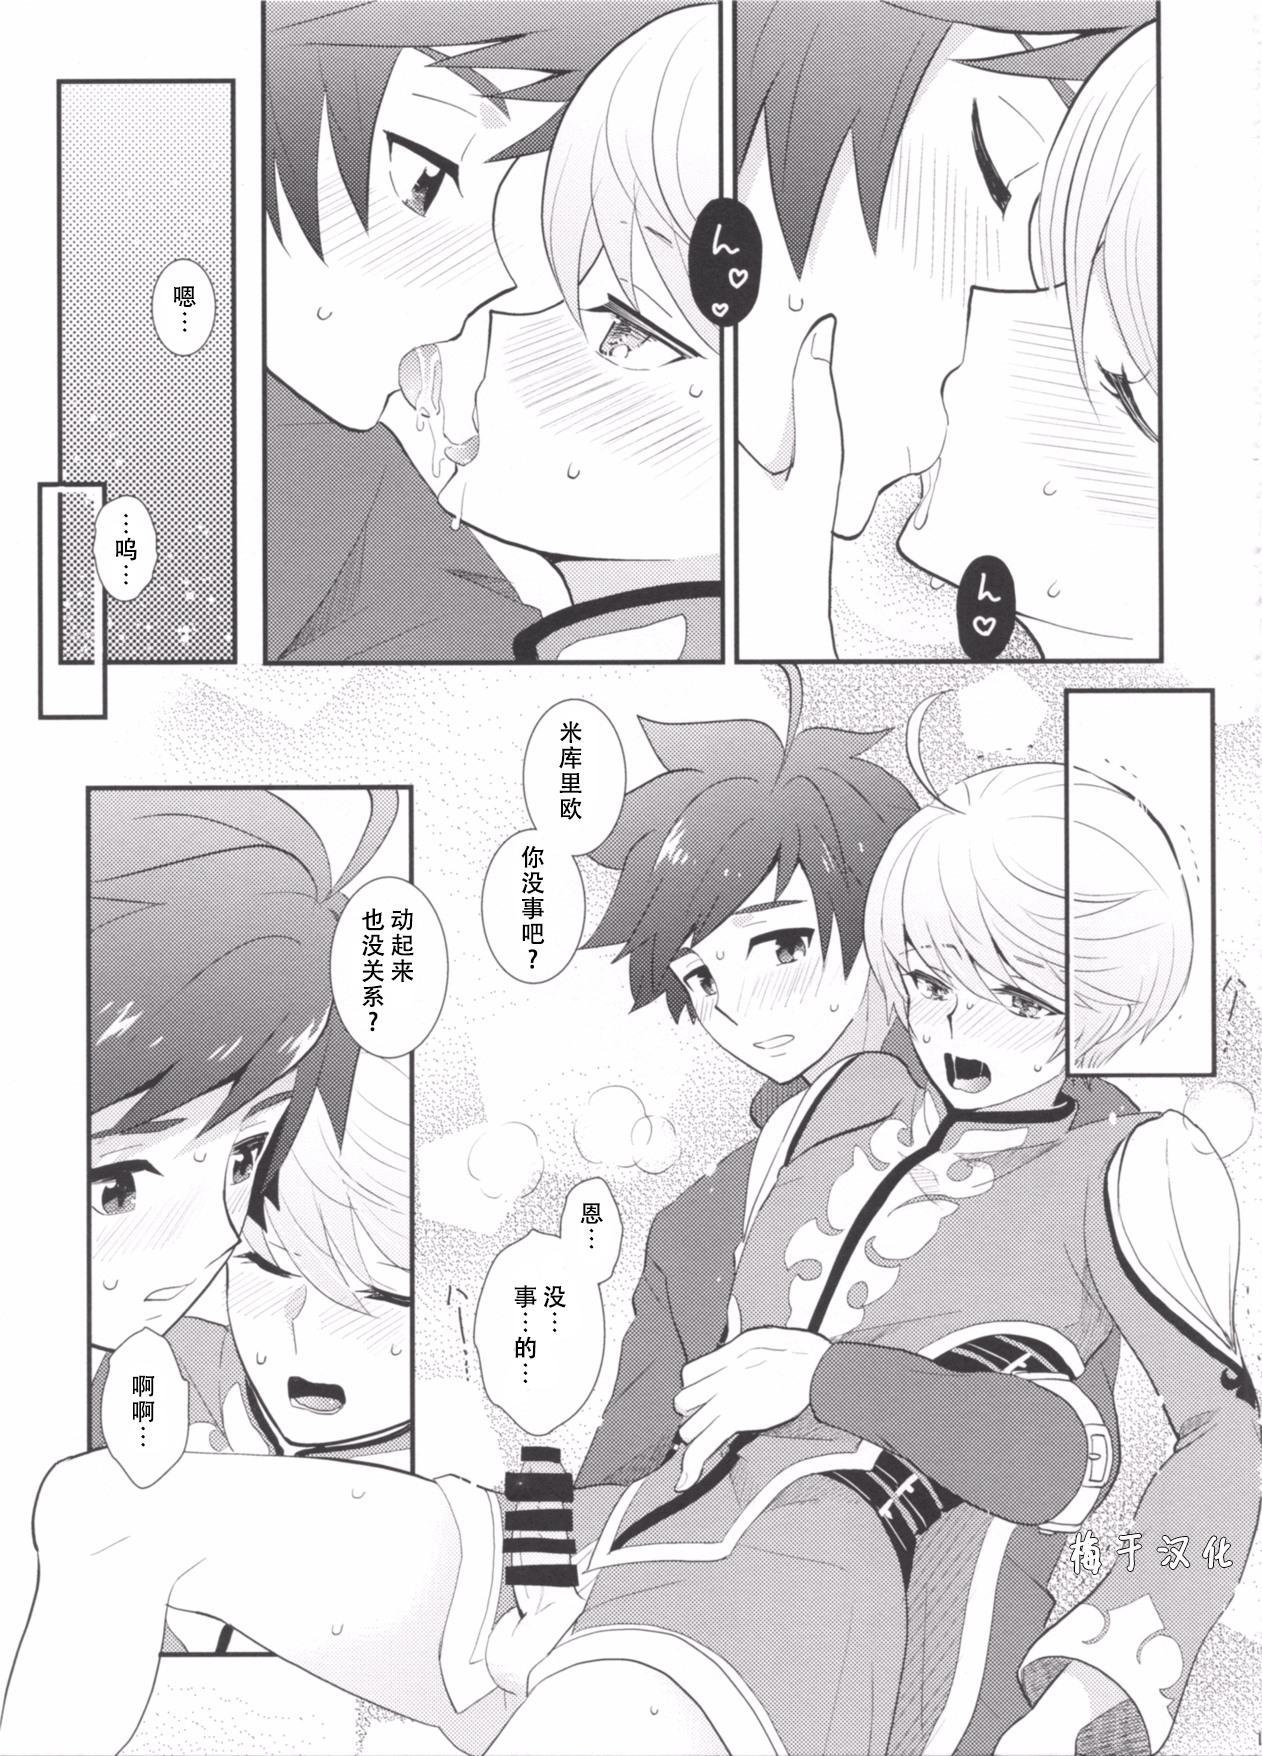 Soft とろける体温 - Tales of zestiria Tribute - Page 10